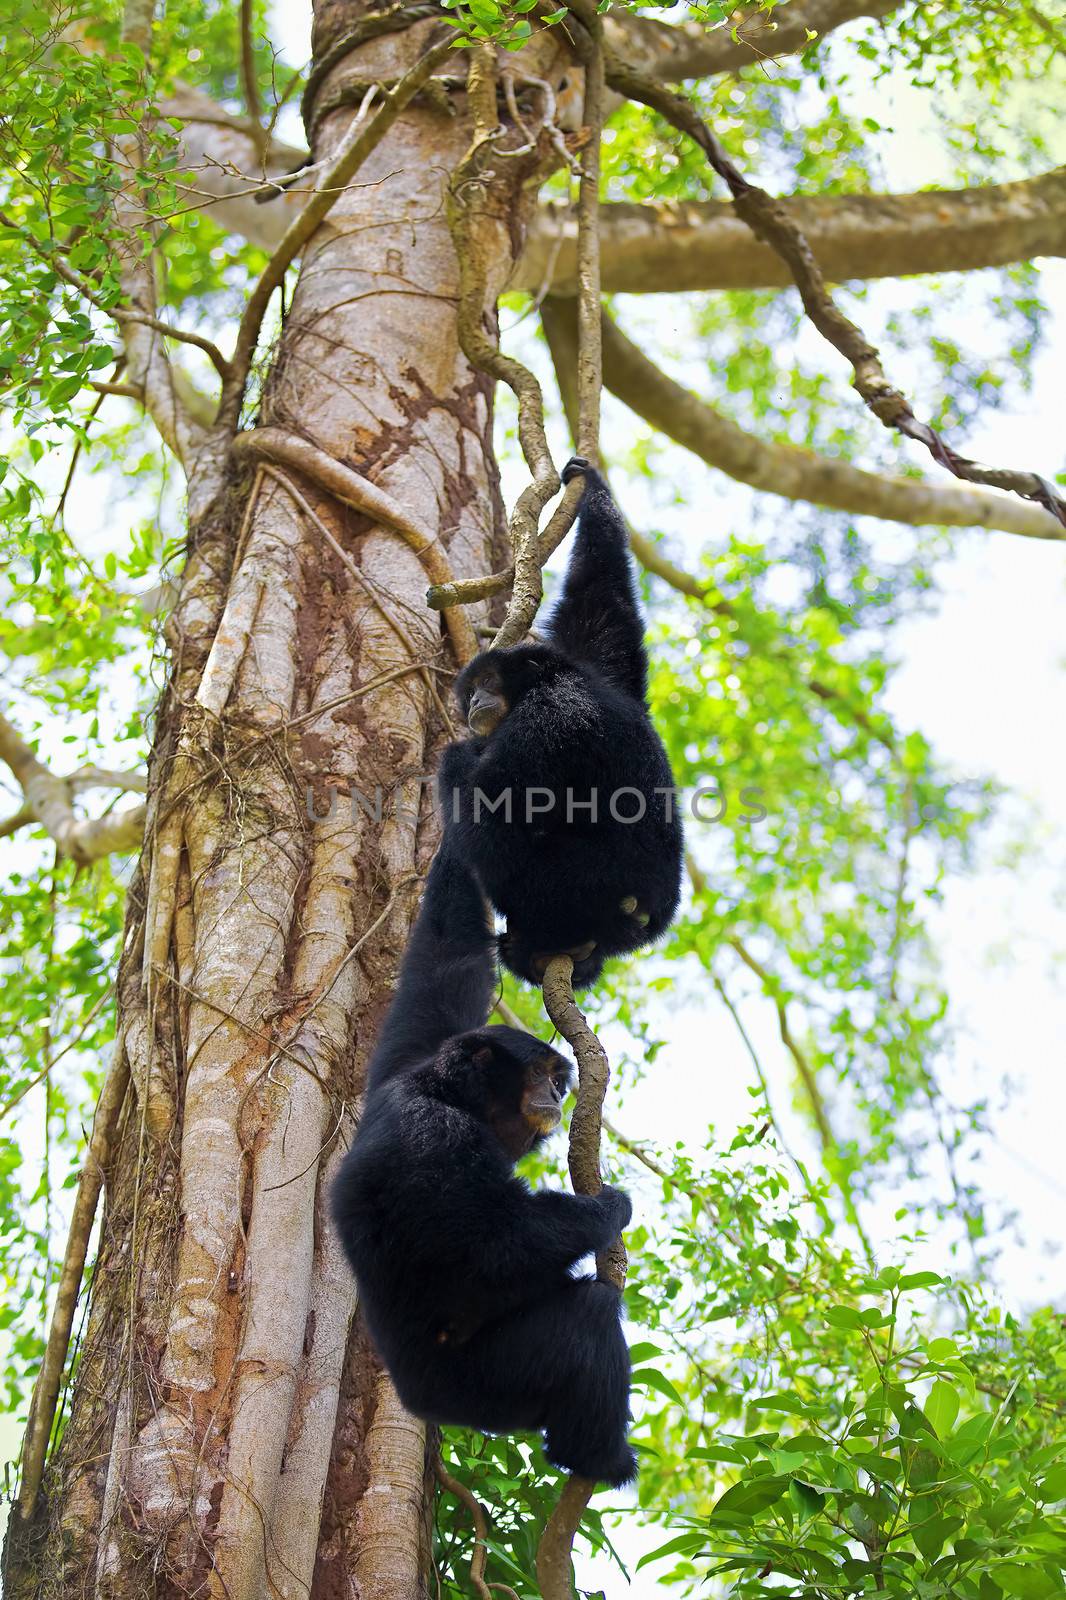 Two Siamang Gibbons hanging in the trees in Malaysia